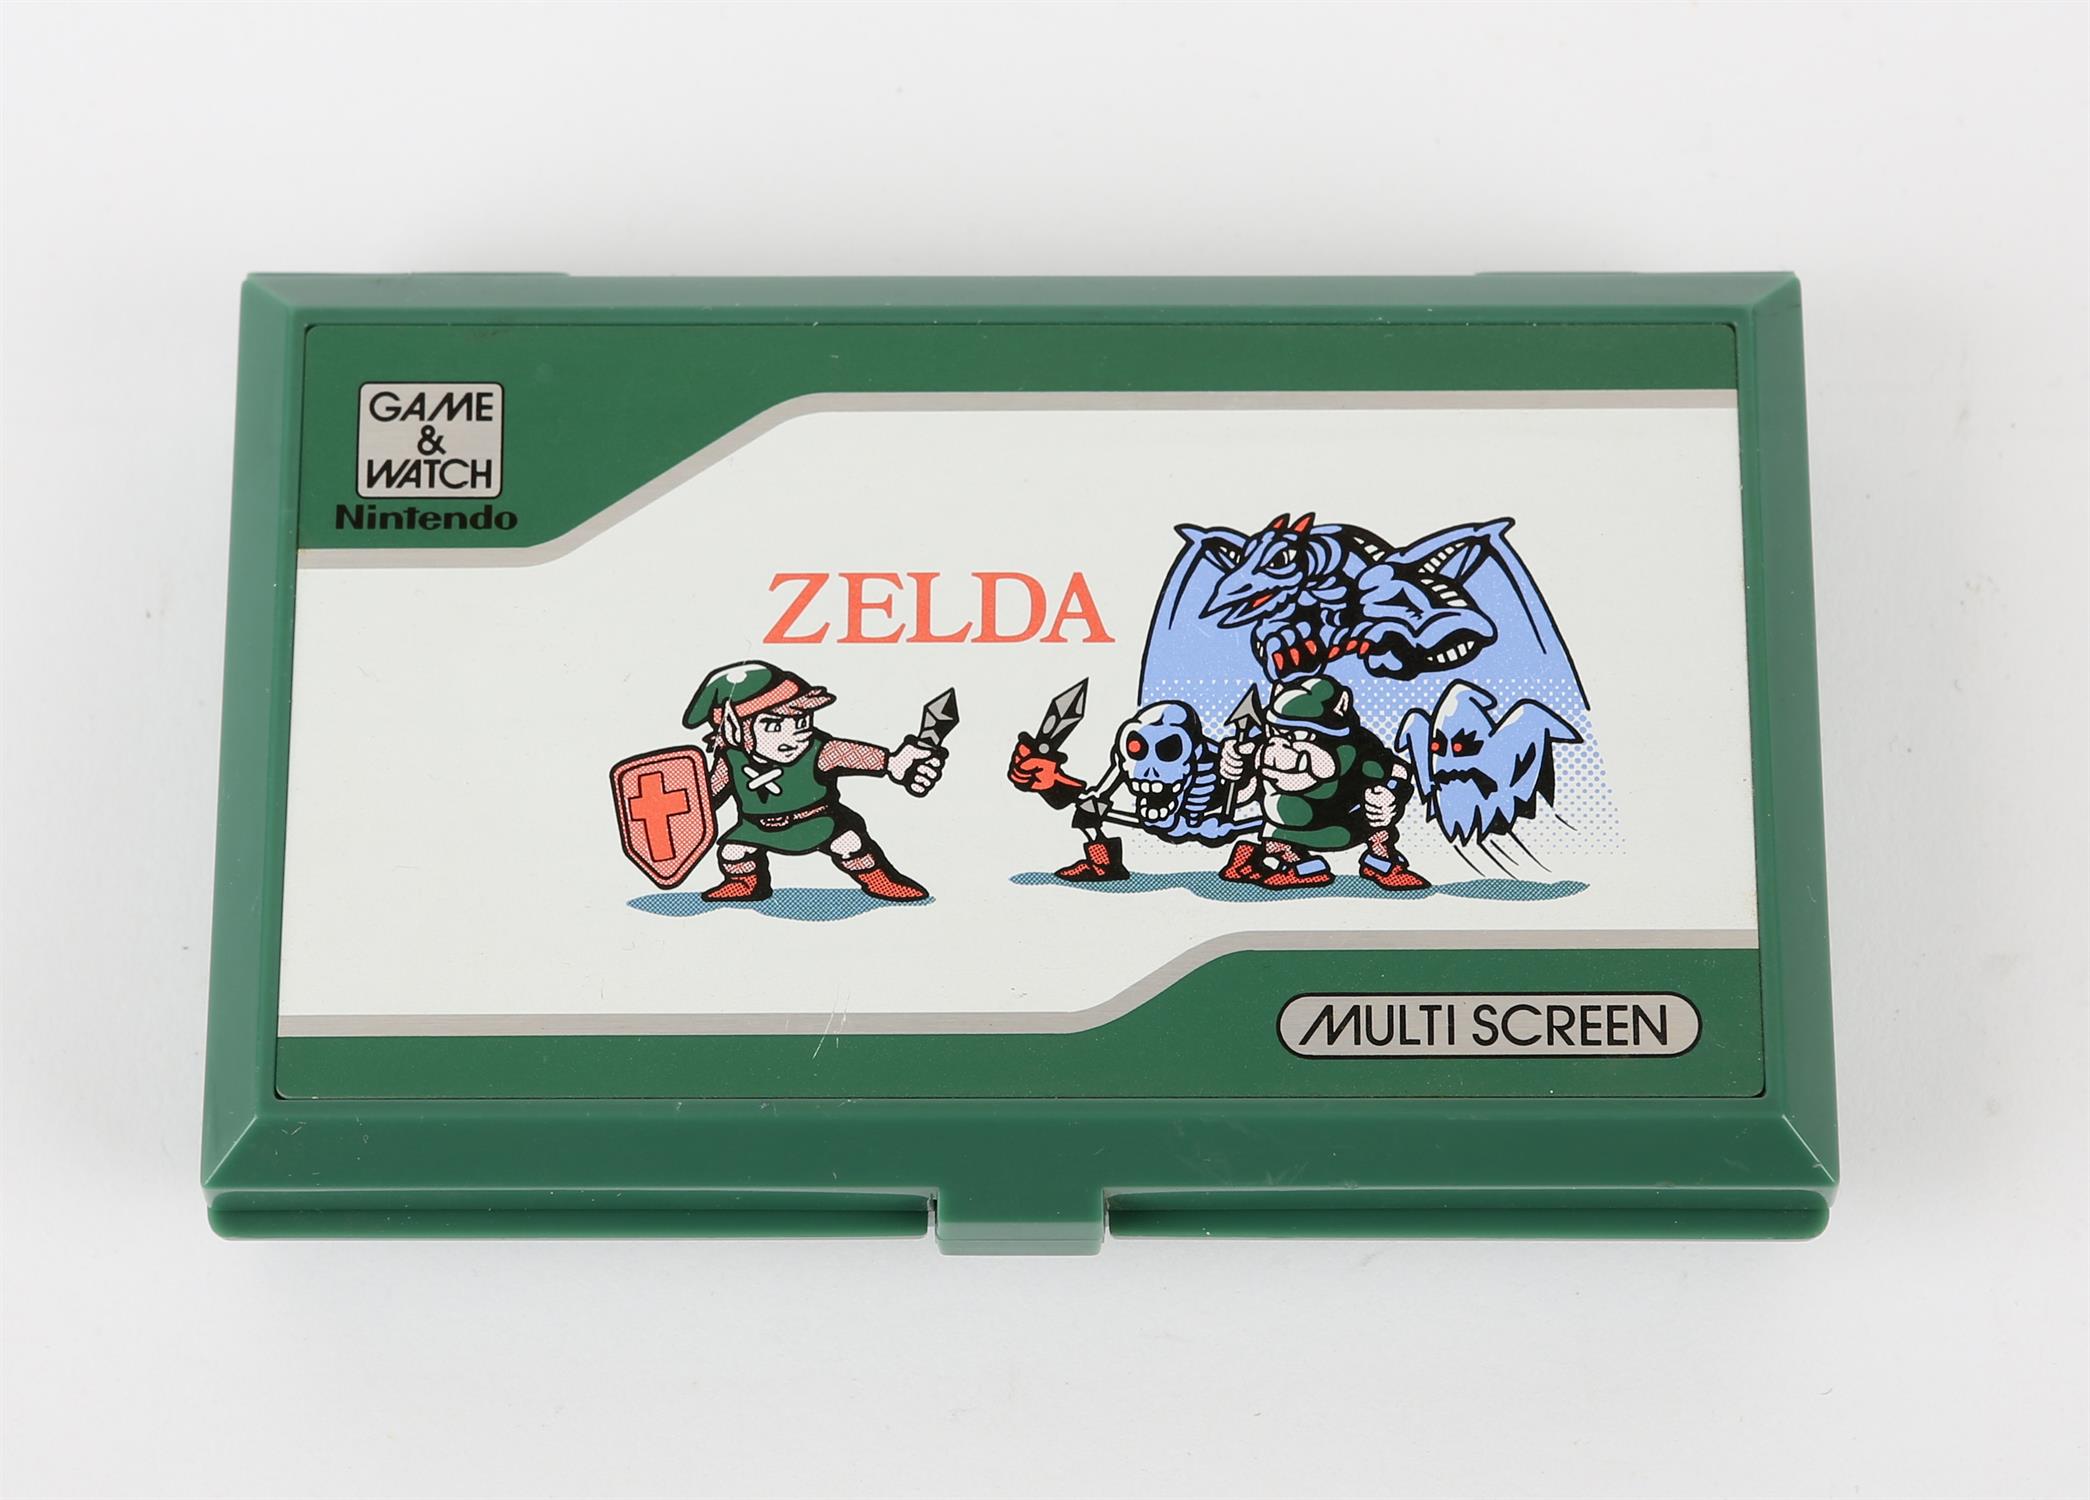 Nintendo Game & Watch Zelda [ZL-65] handheld console Console is unboxed and untested - Image 2 of 2